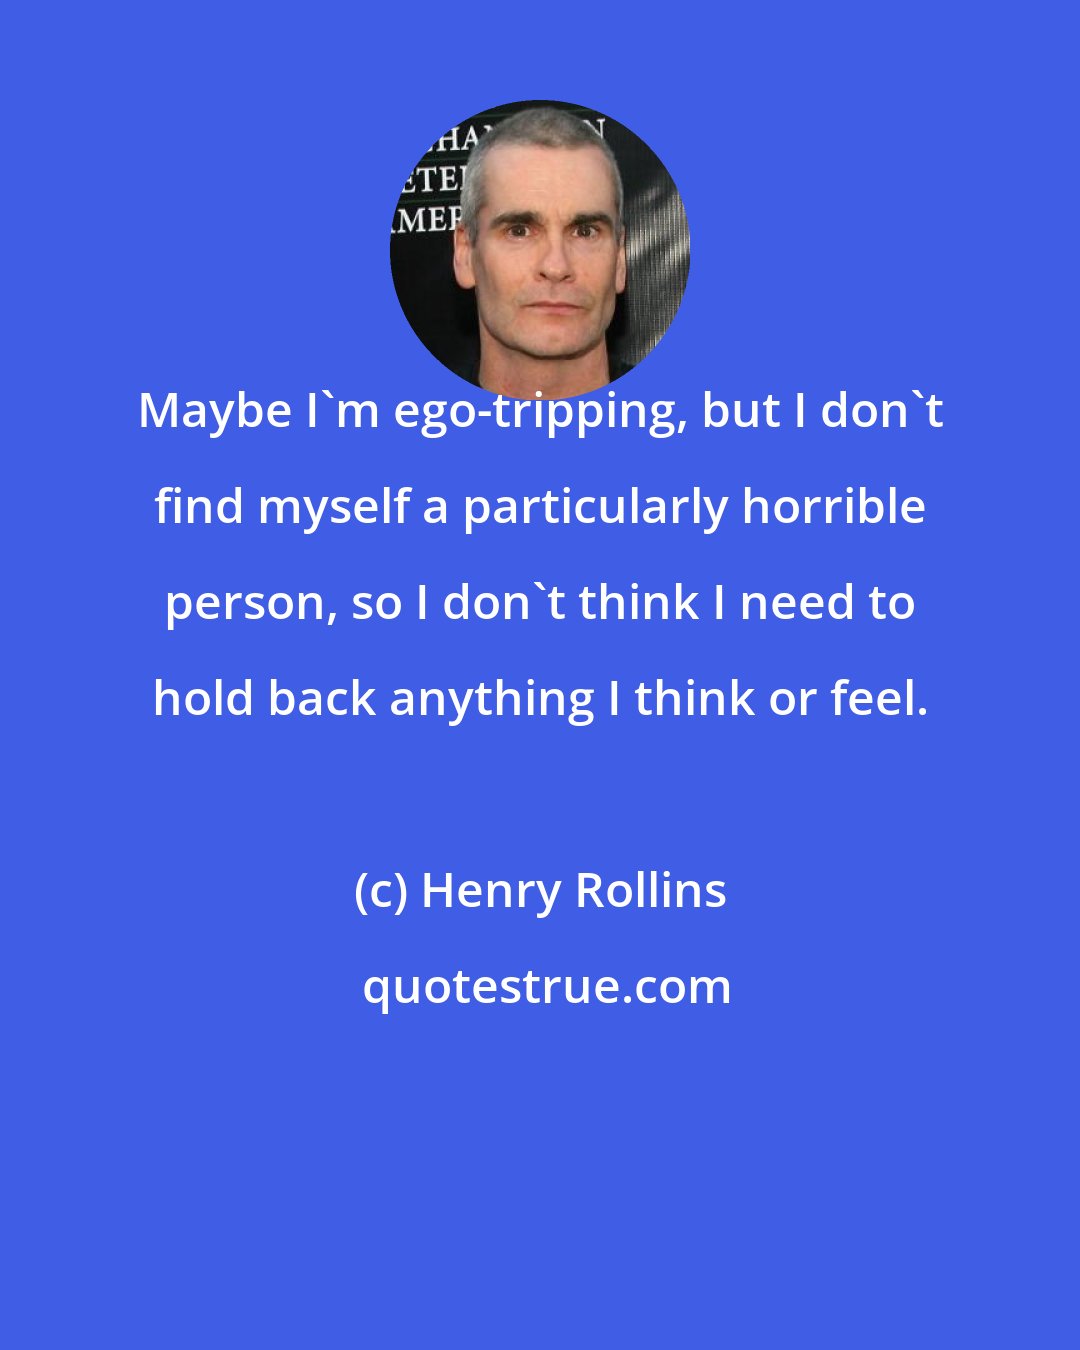 Henry Rollins: Maybe I'm ego-tripping, but I don't find myself a particularly horrible person, so I don't think I need to hold back anything I think or feel.